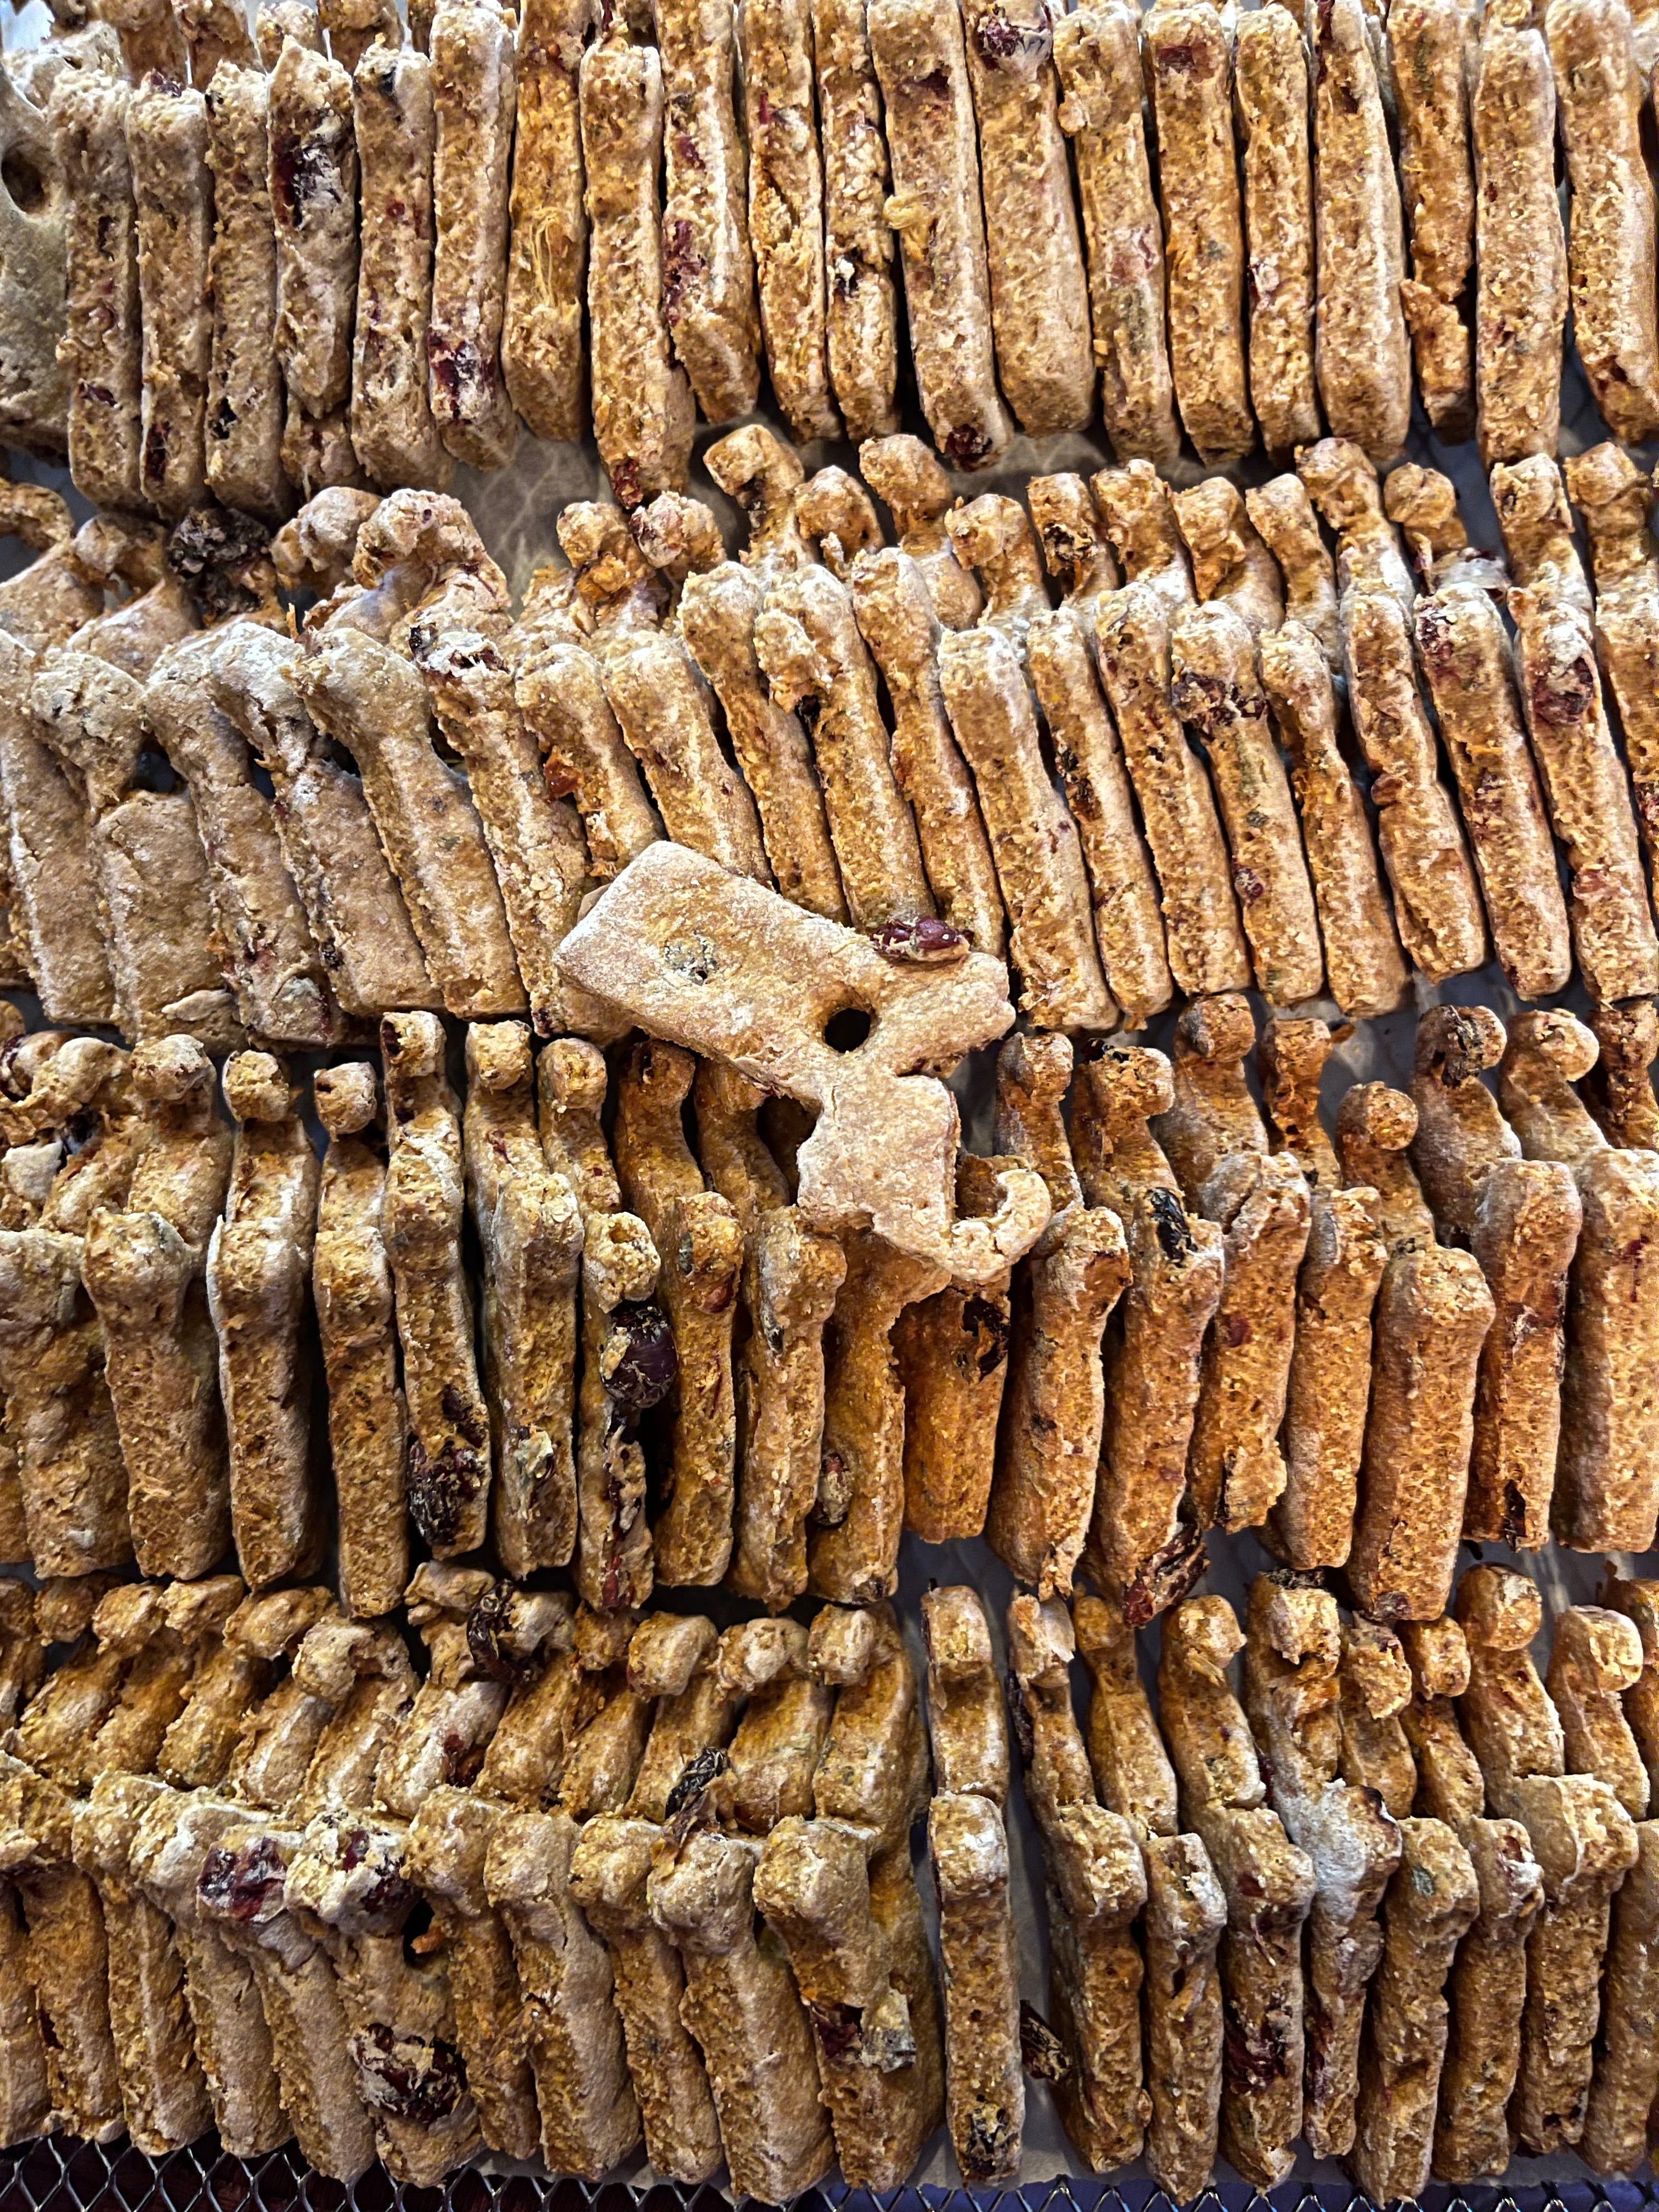 Masshole Biscuit Co, Massachusetts shaped dog treats, made with all natural ingredients. The human grade treats are lined up in rows to show off their whole ingredient add-ins. 